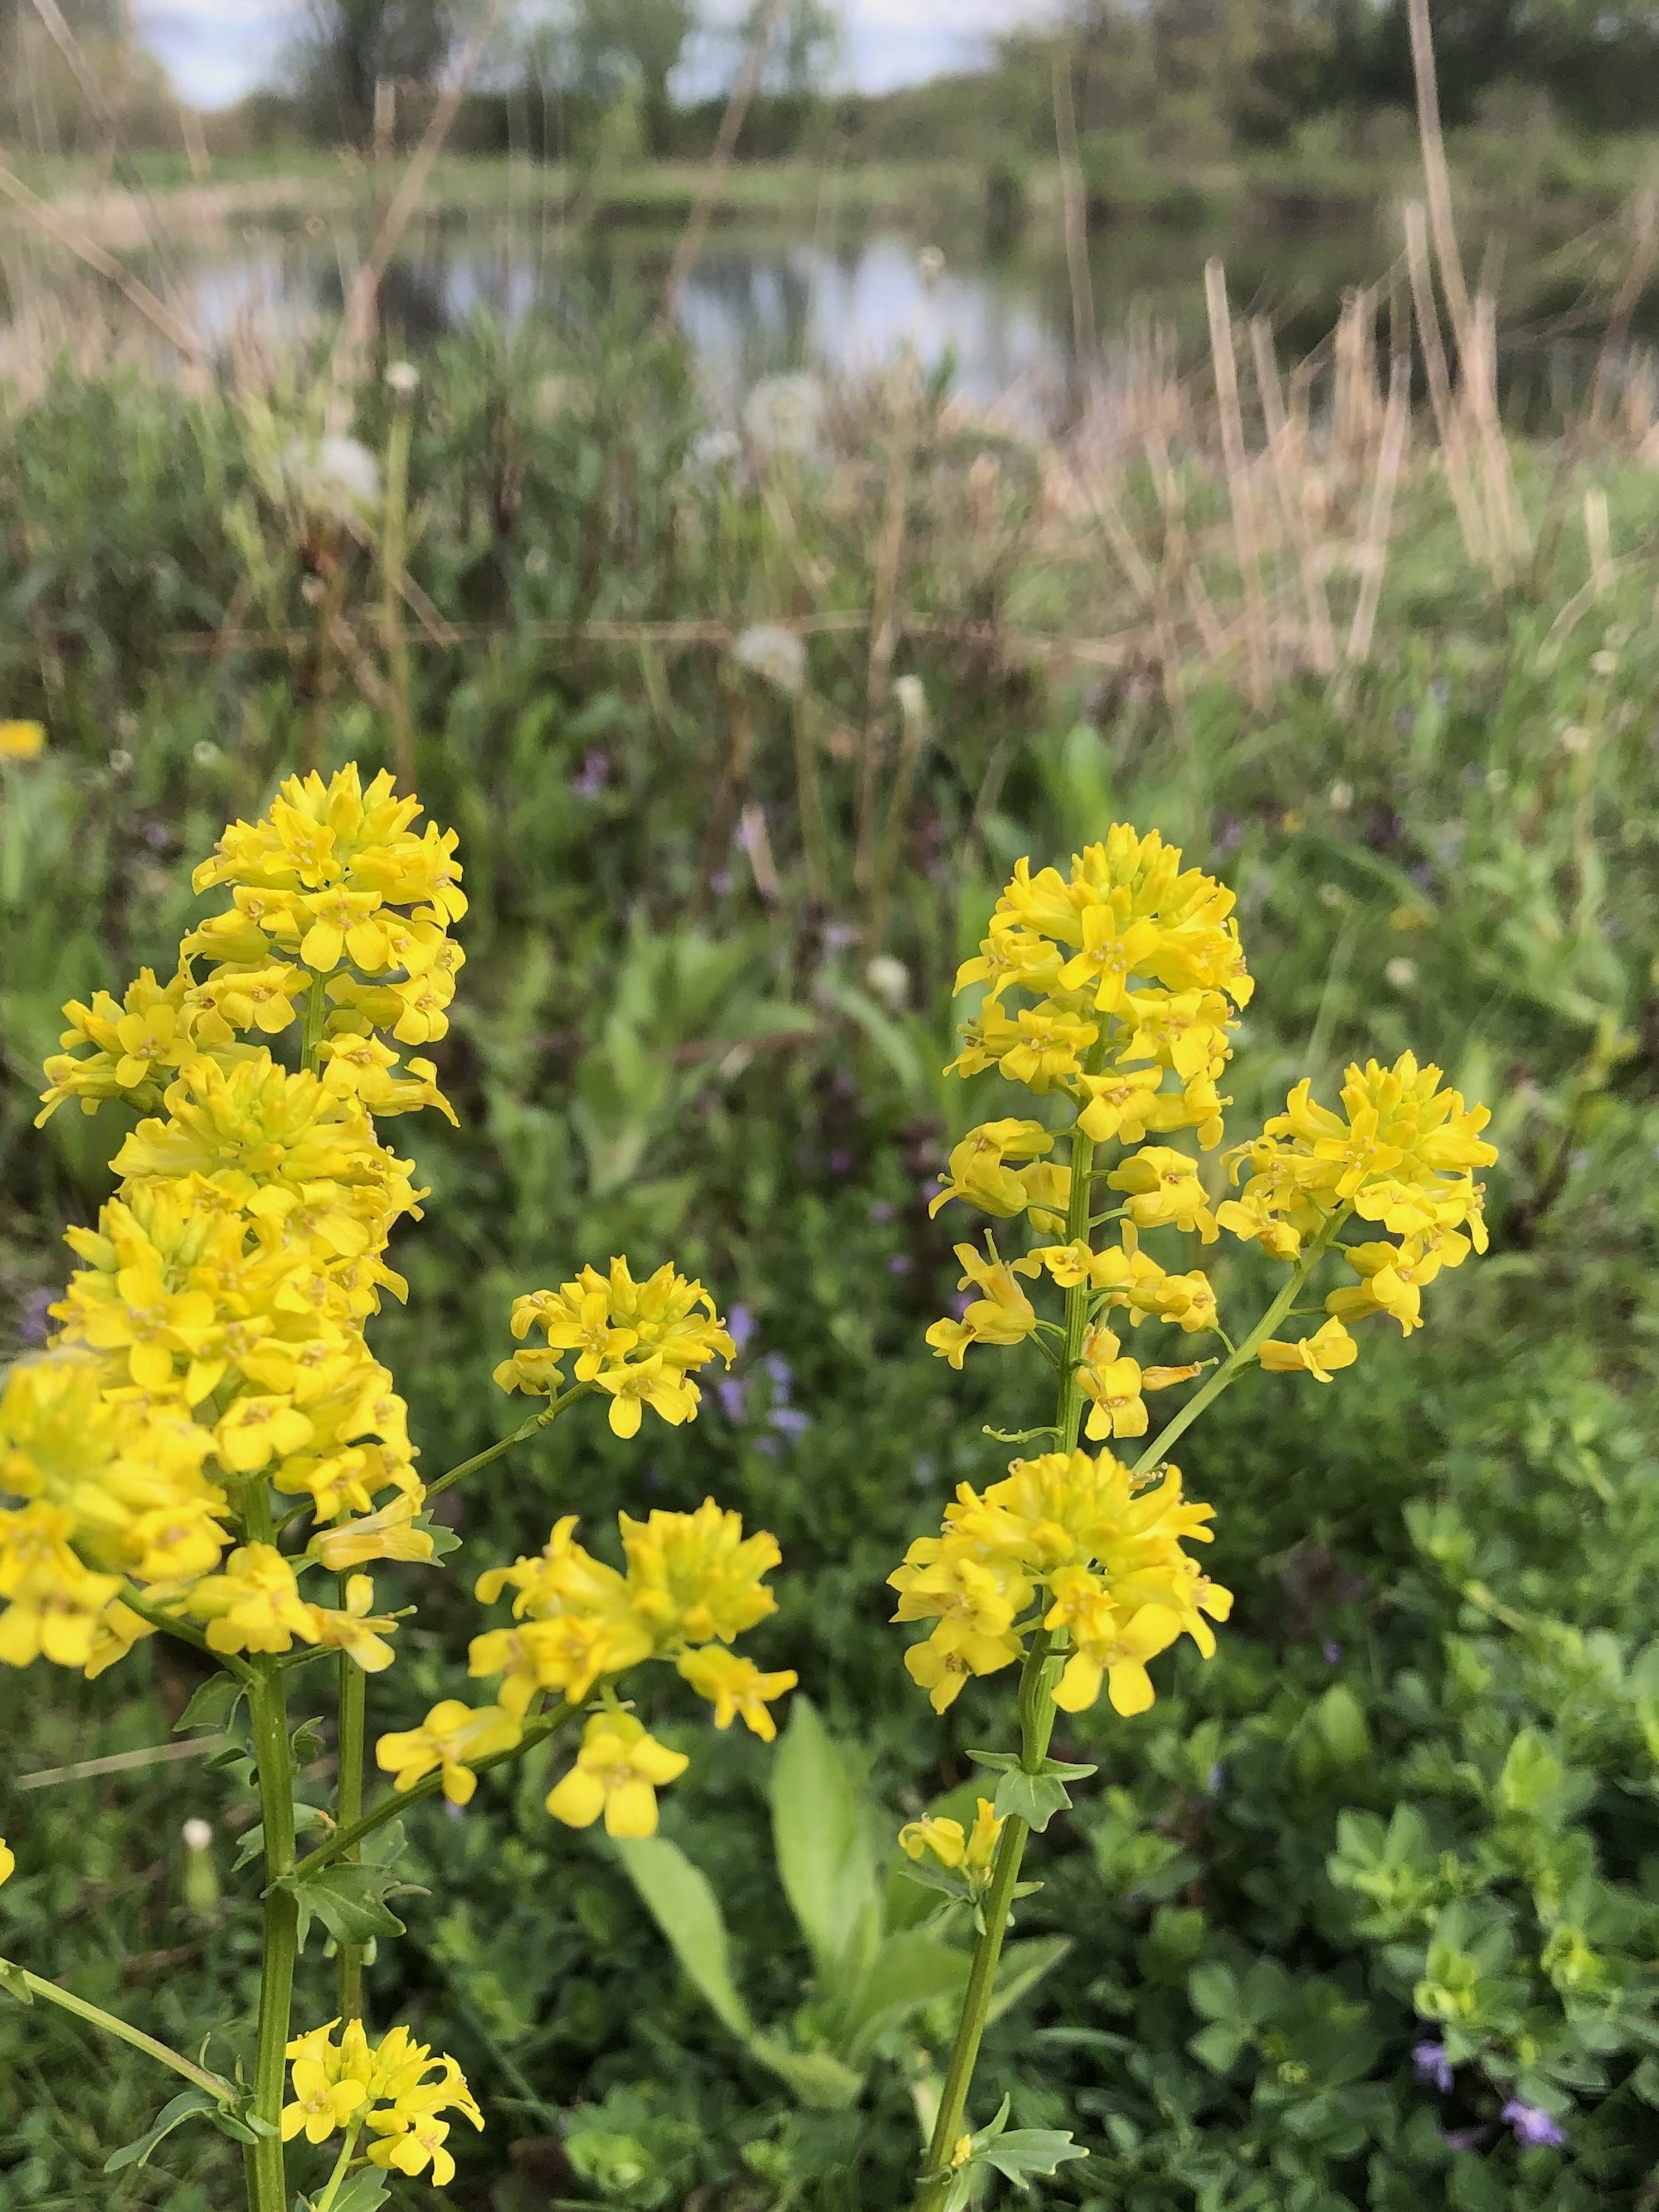 Garden Yellow Rocket in Marion Dunn prairie in Madison, Wisconsin on May 4, 2021.